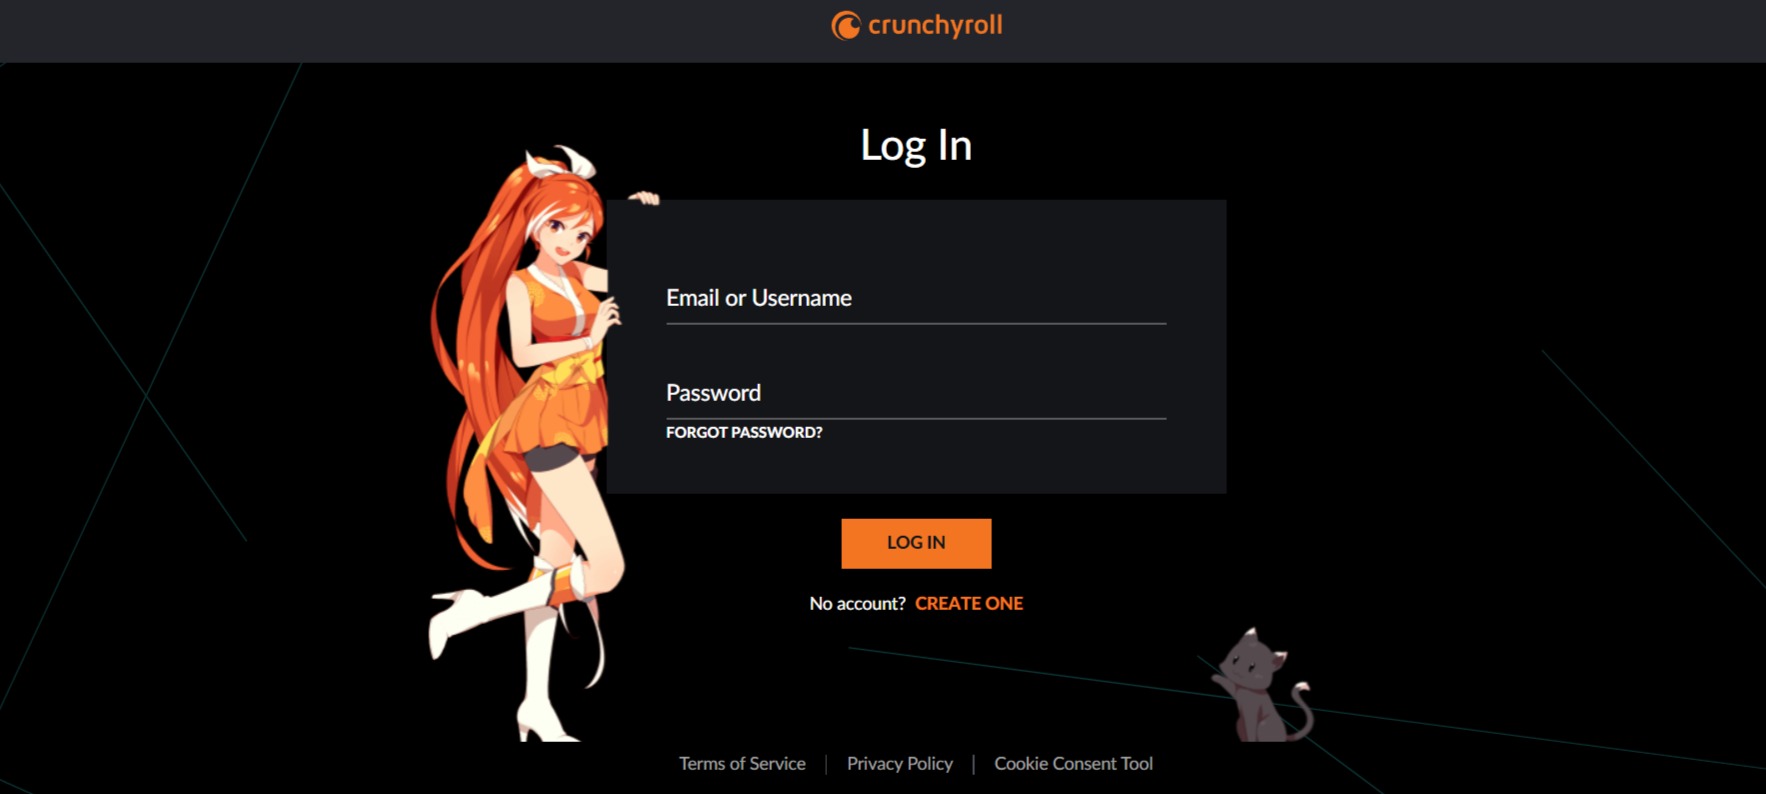 Log in to your Crunchyroll account